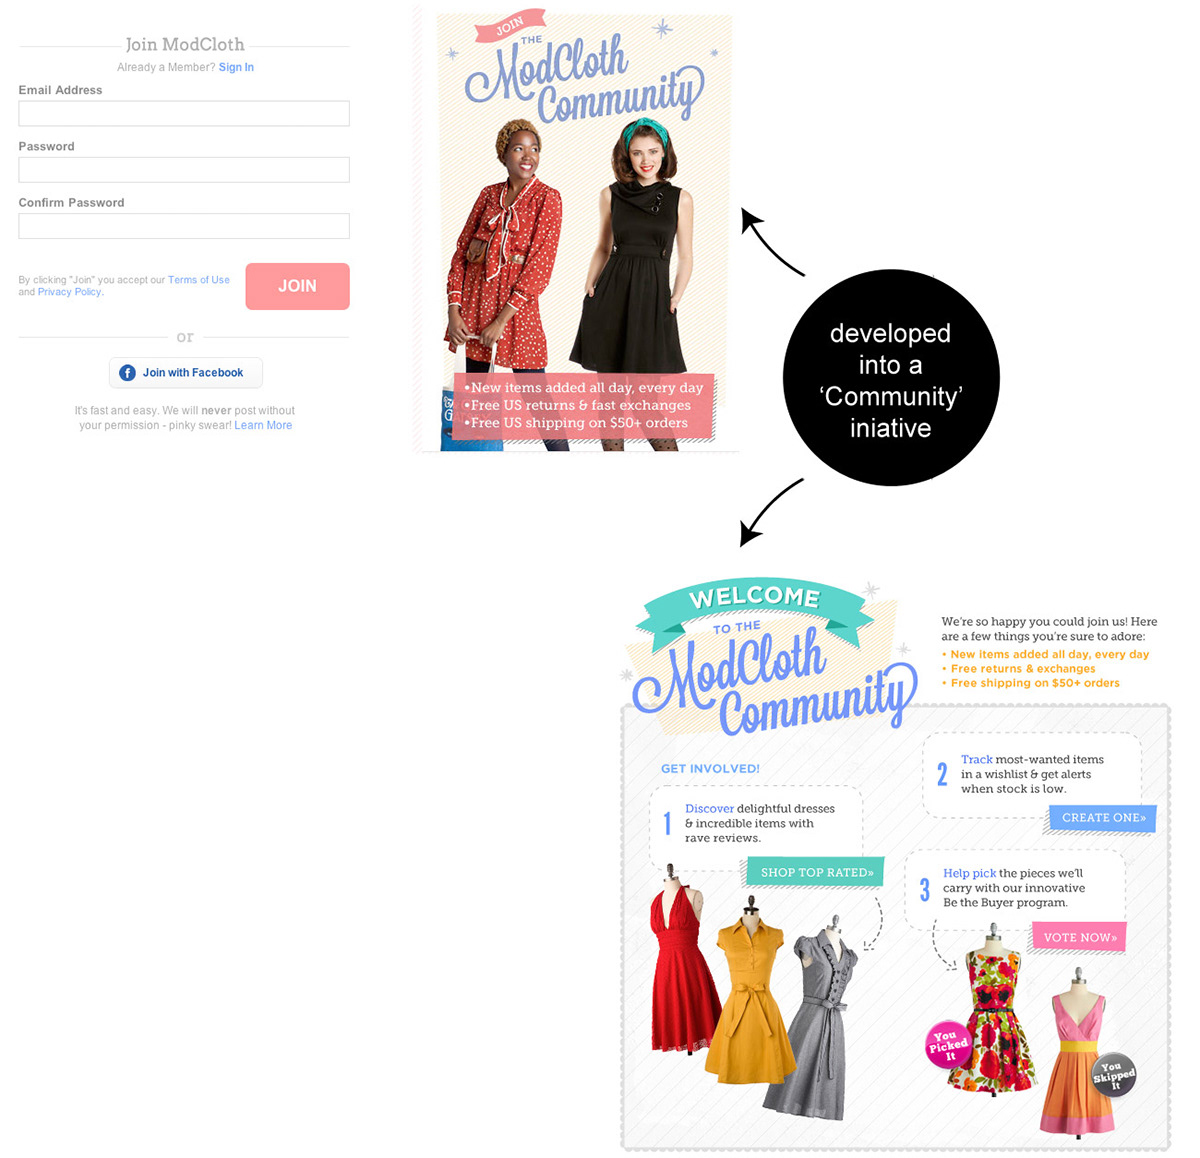 modcloth modcloth.com Email newsletter brand building communications marketing  